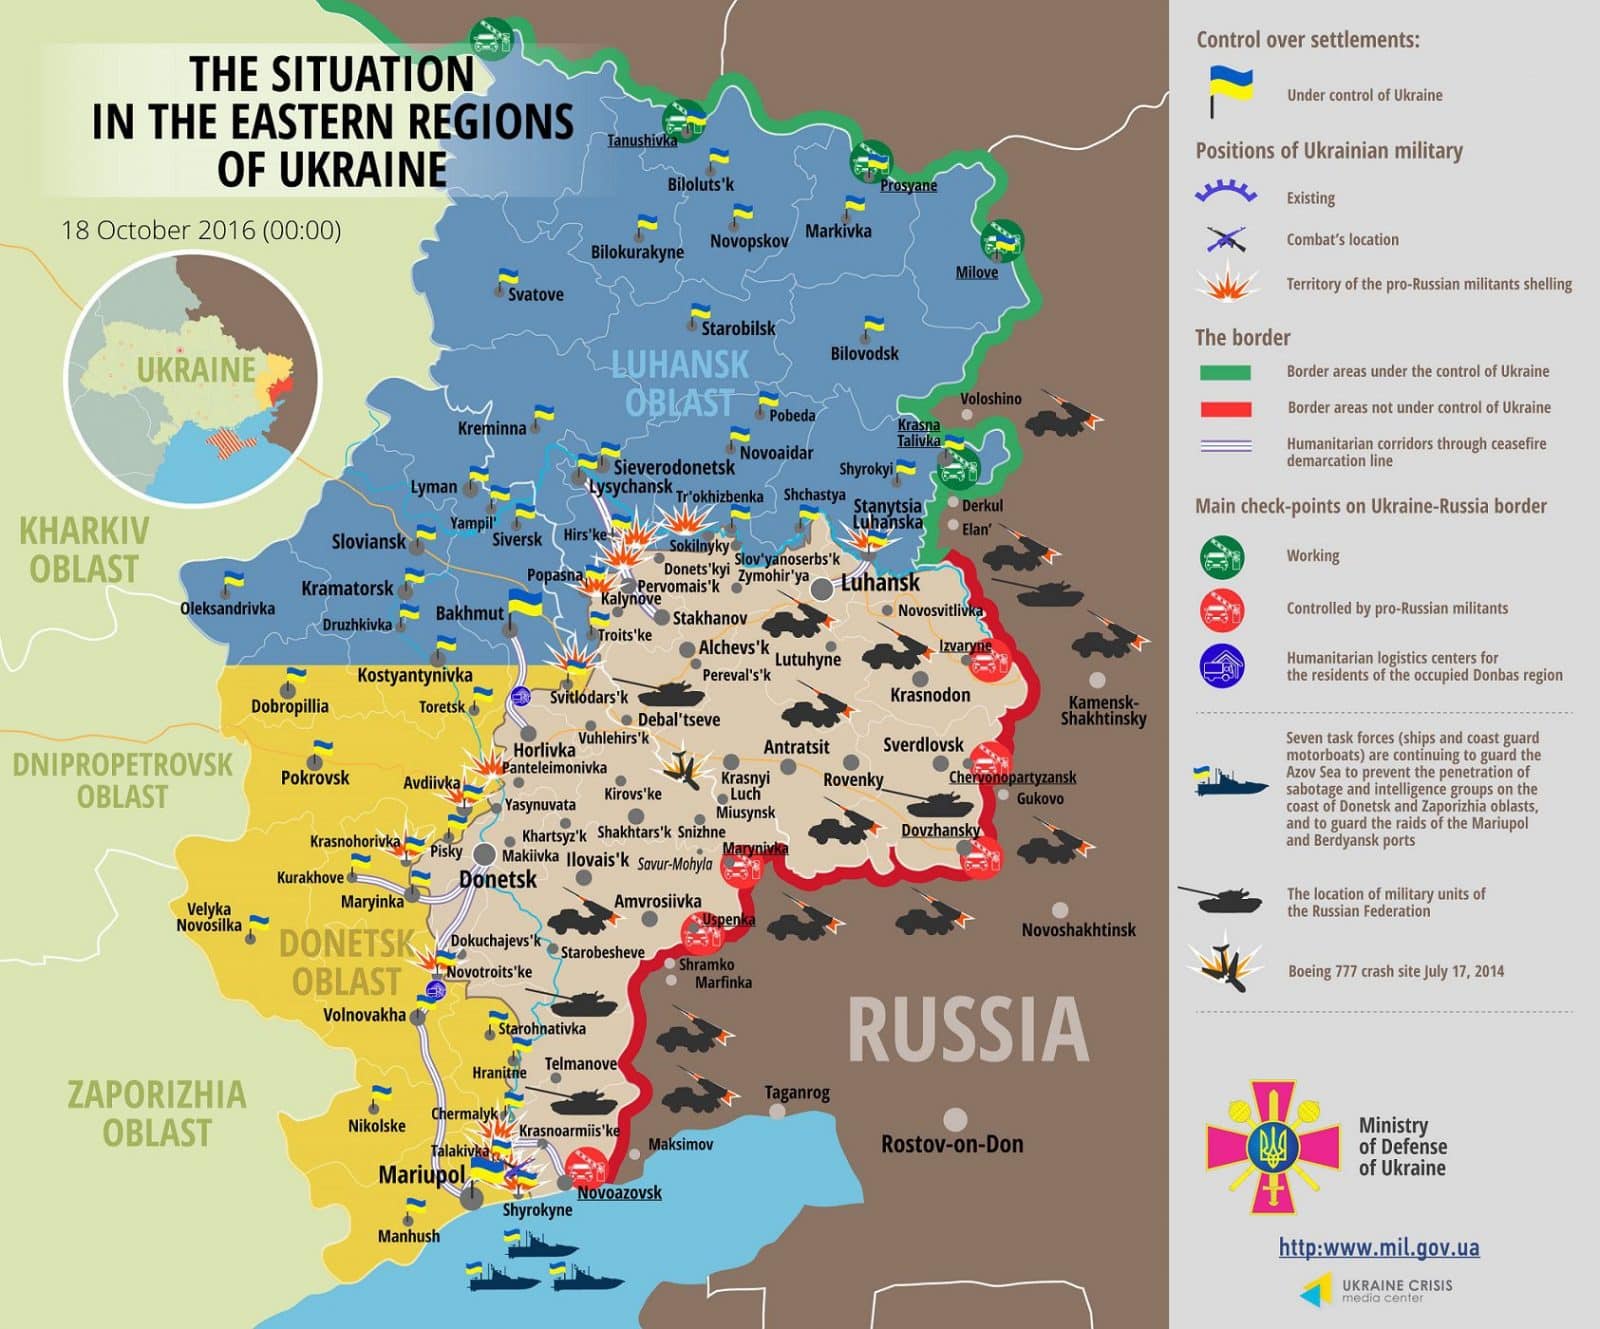 Russian militants were shelling Ukrainian positions for 11 hours non-stop, launched over 500 missiles